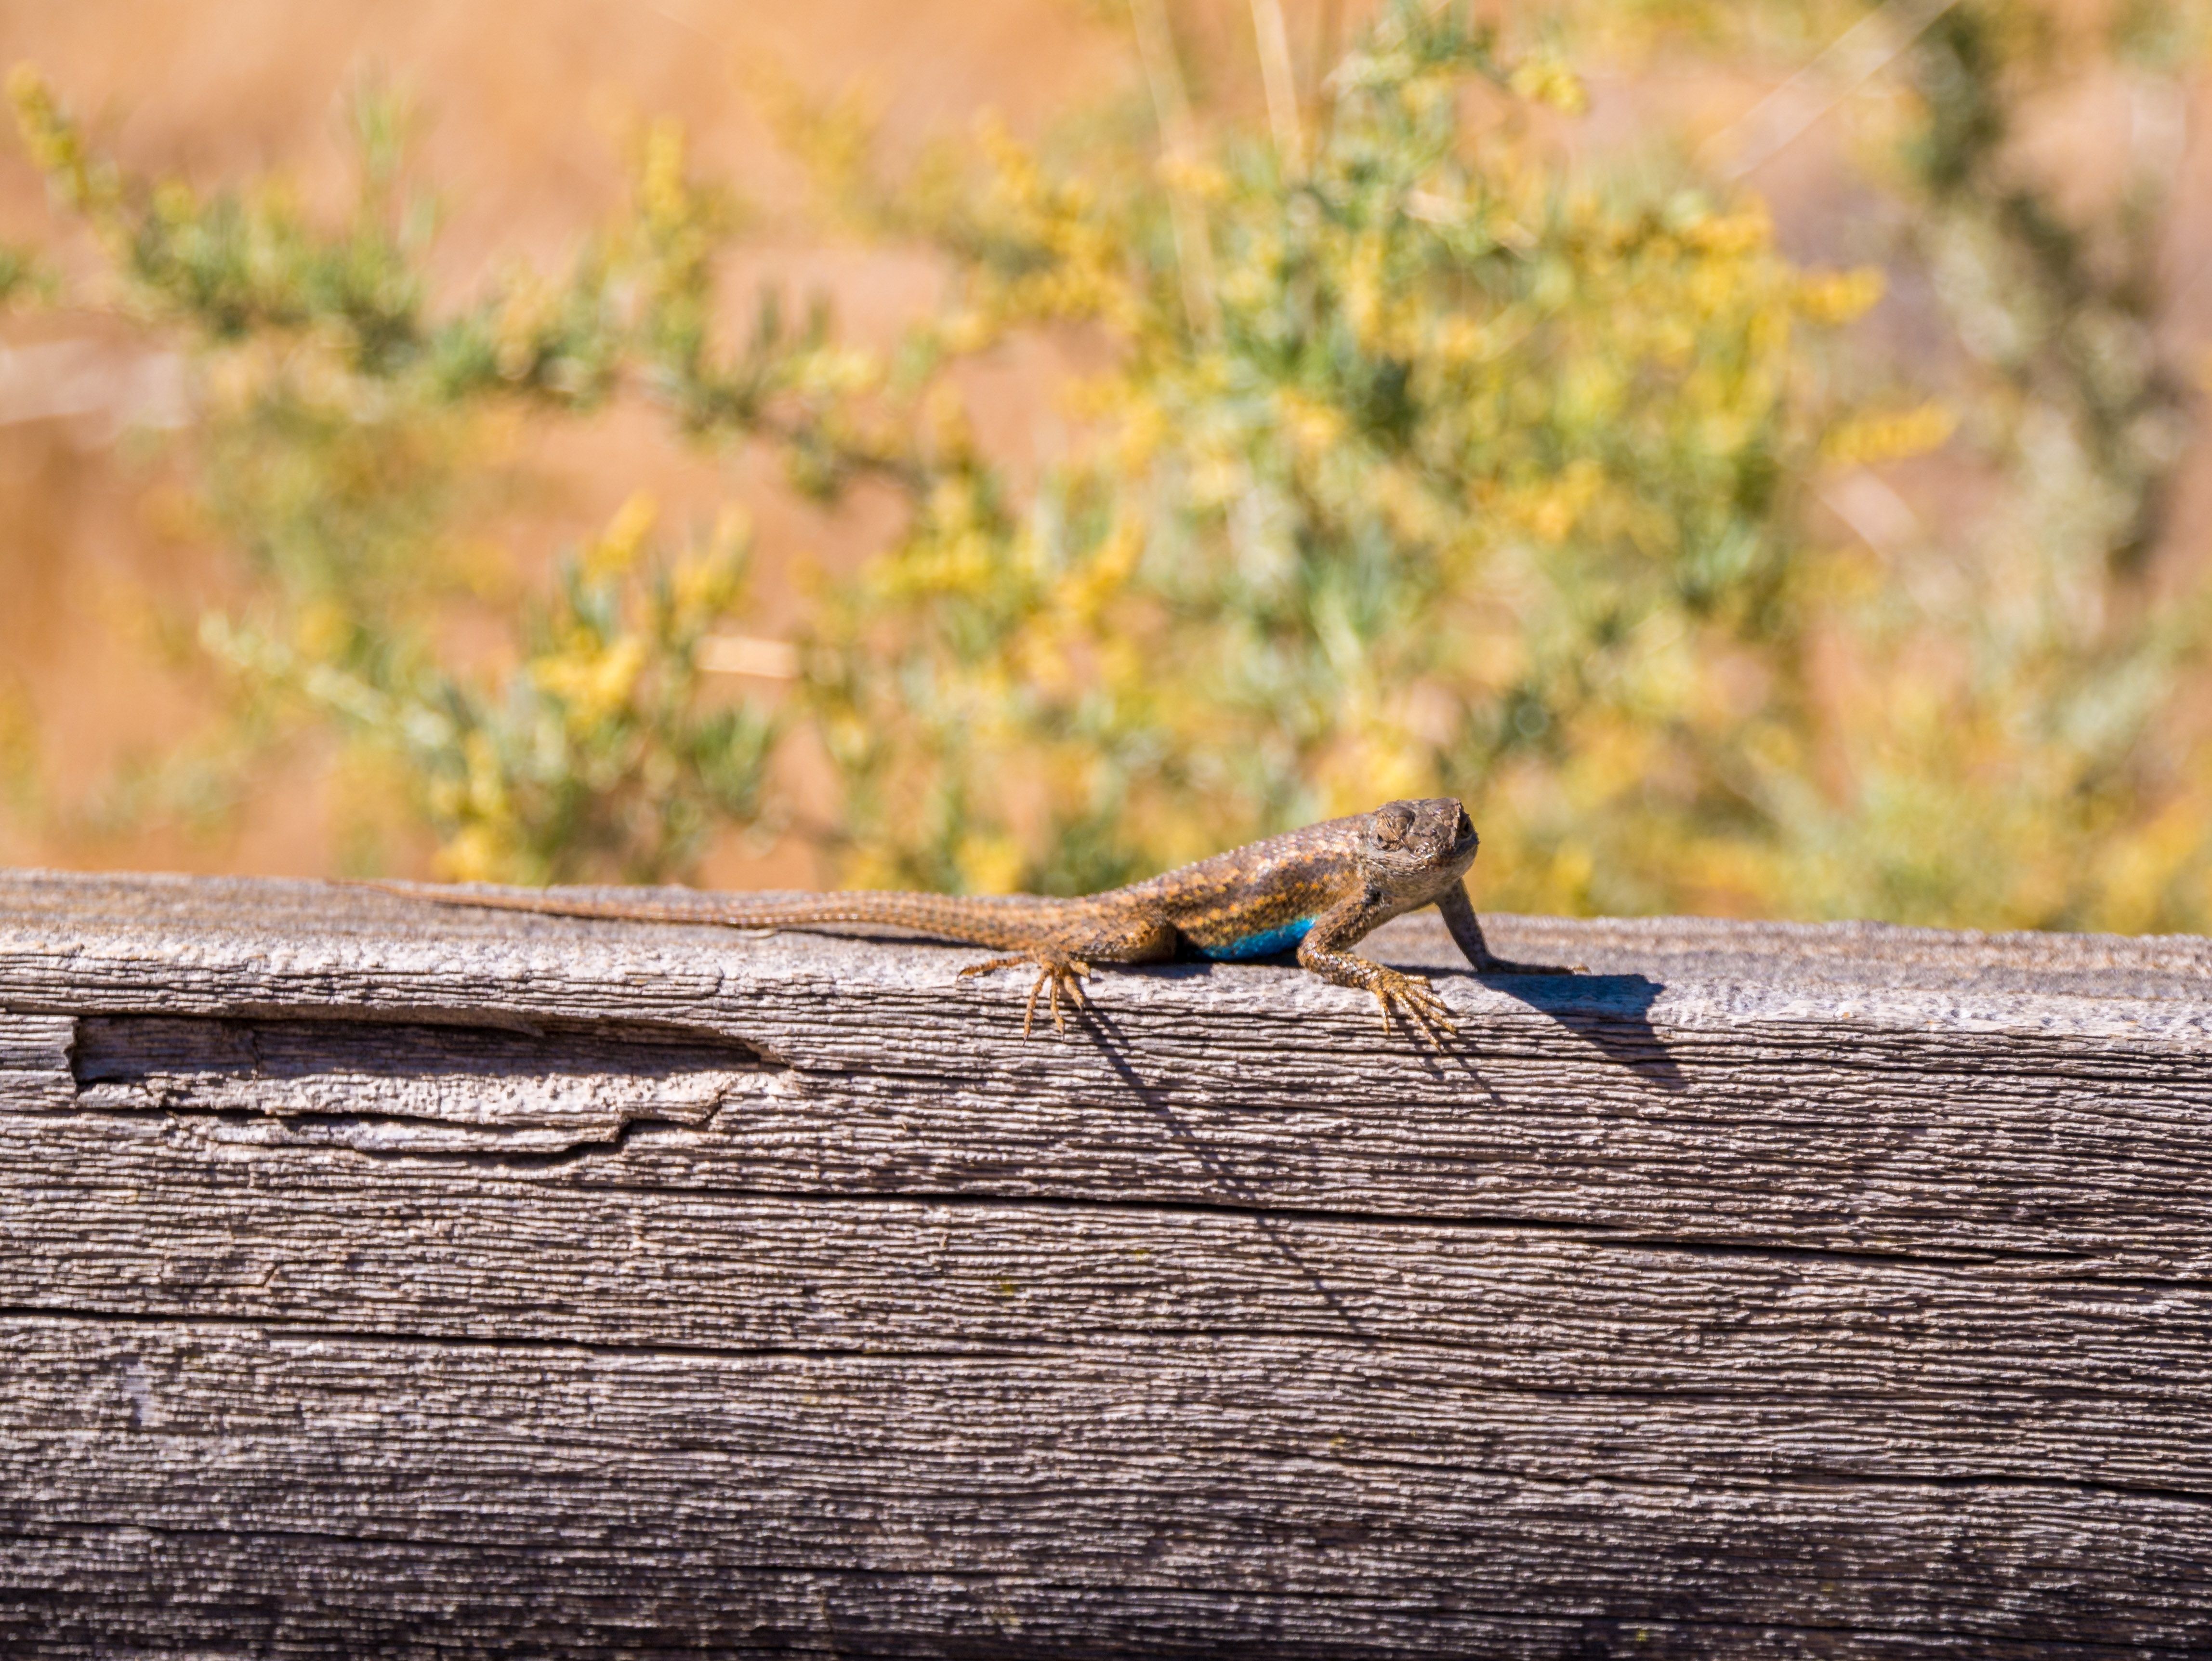 Lizard on a fence along the Pa'rus Trail in Zion National Park